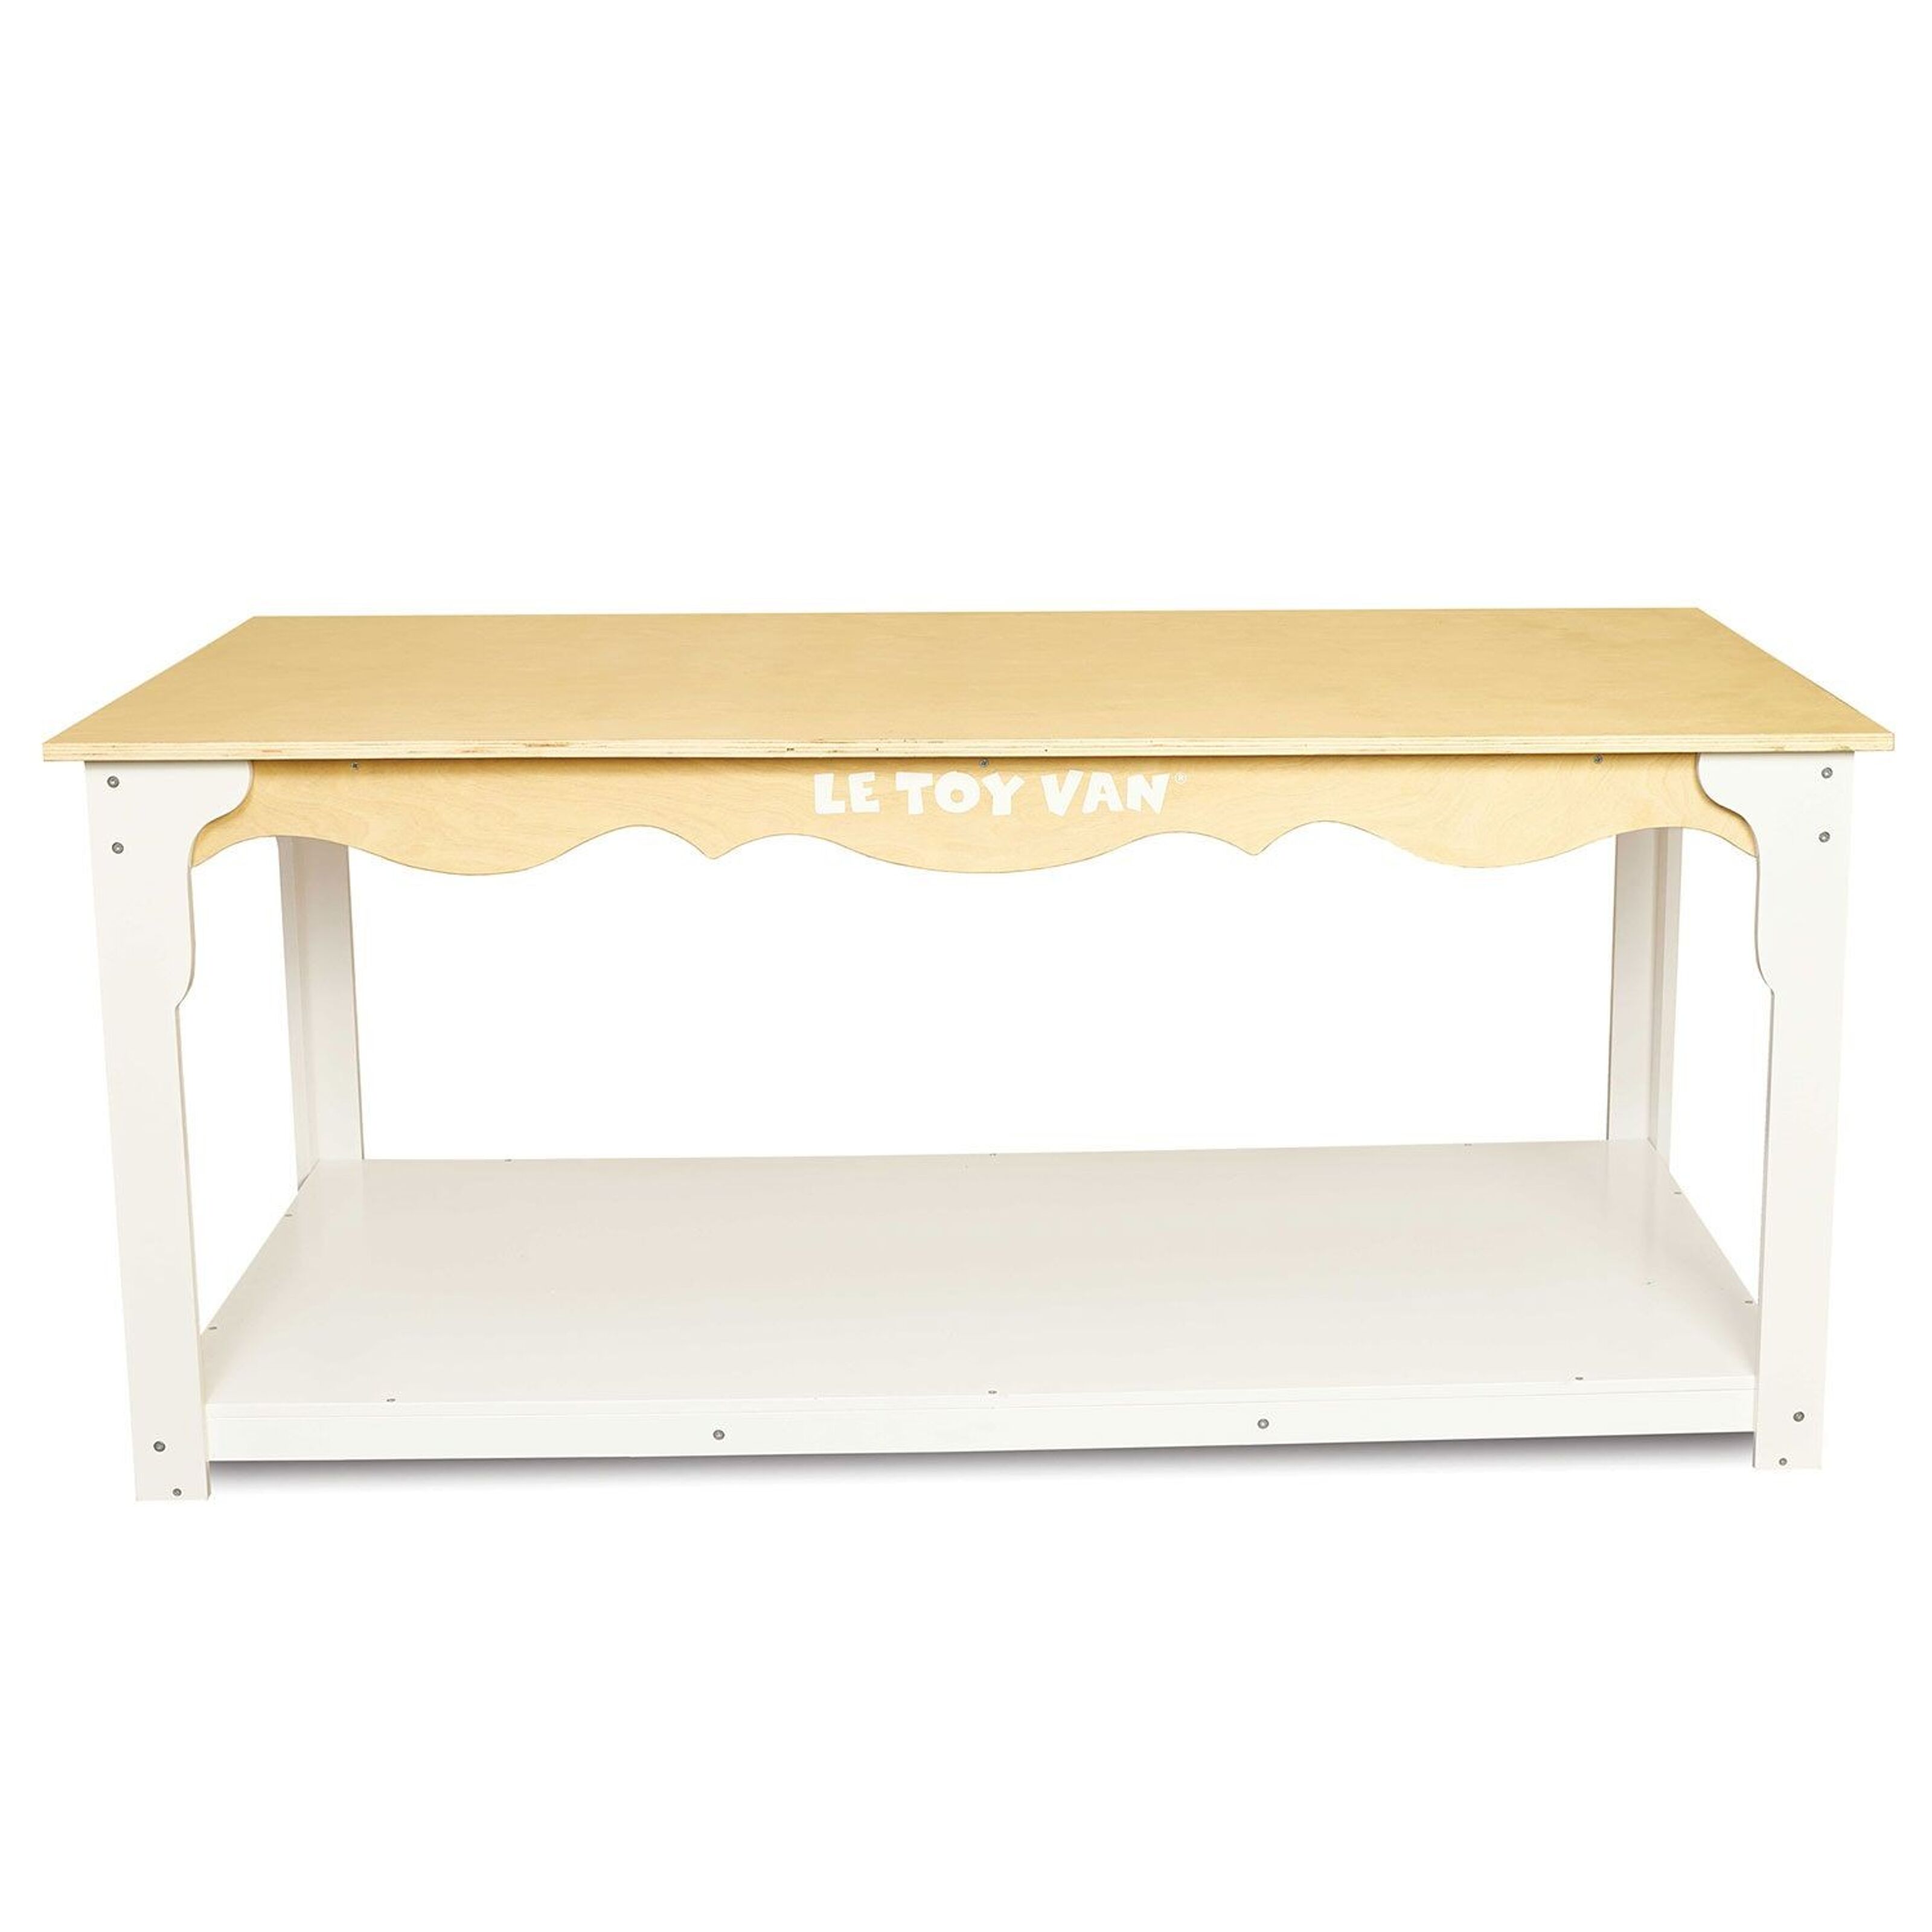 Buy wholesale Exhibition table small / Display table small MK4202